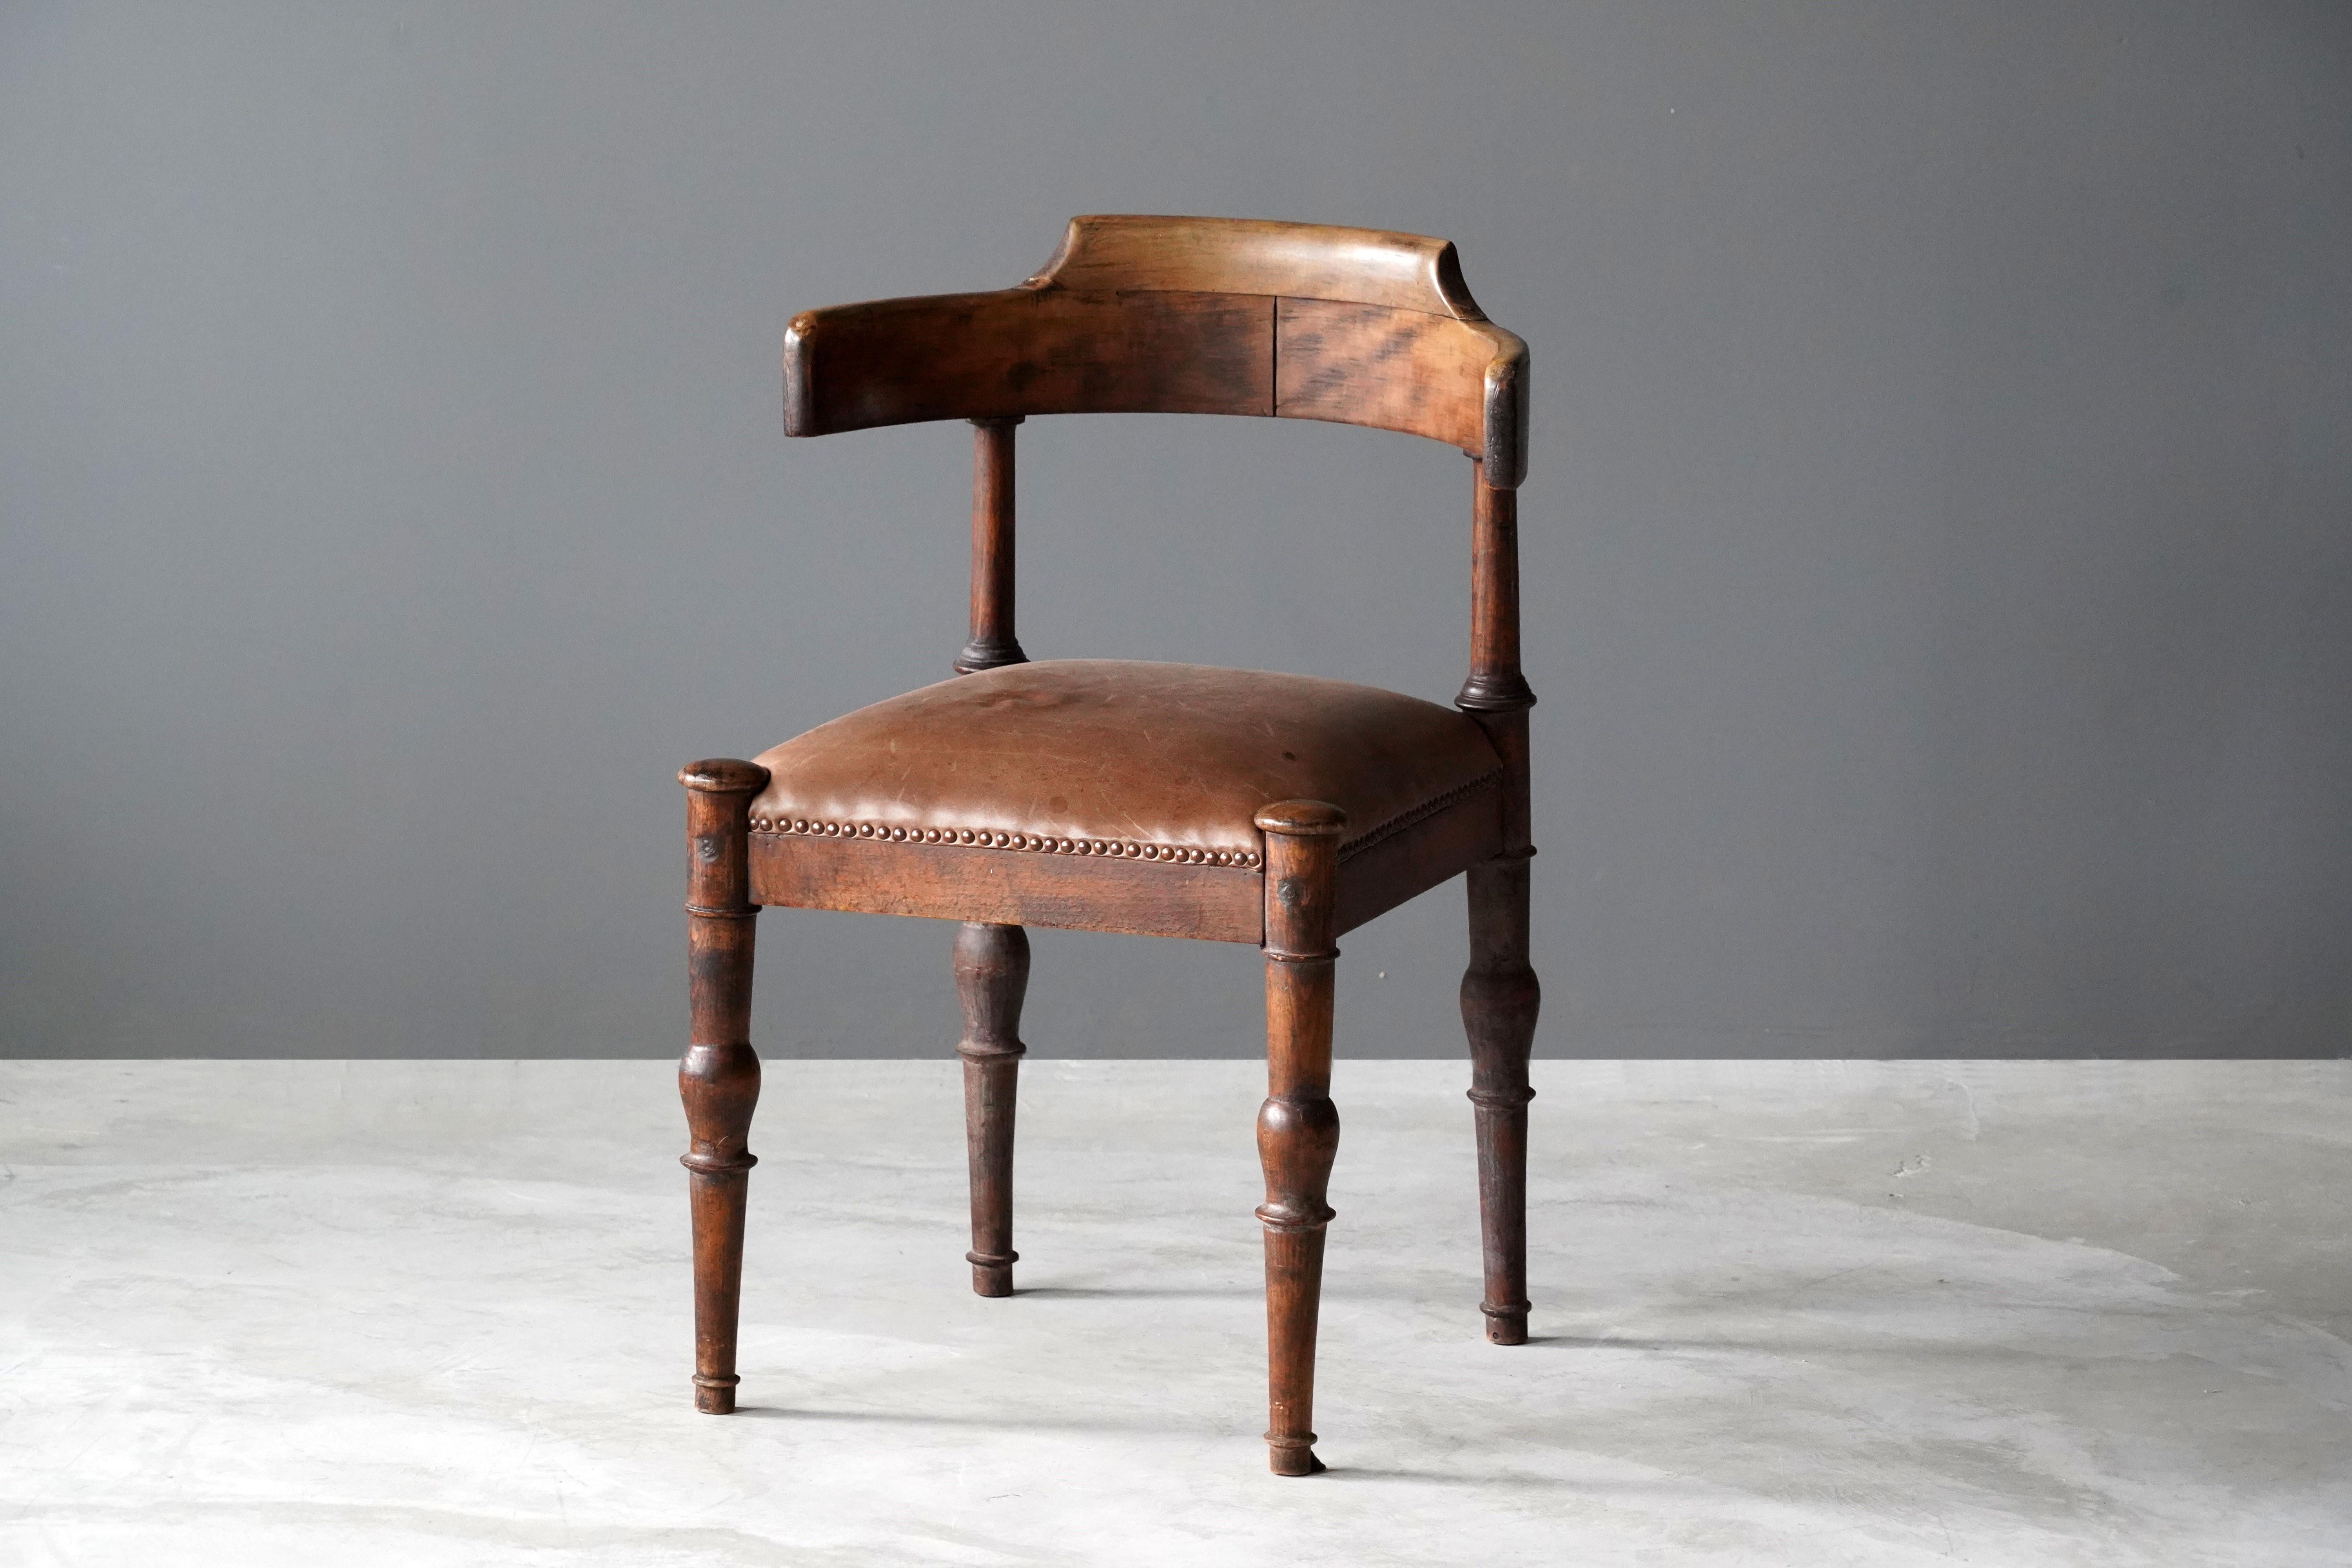 An armchair attributed to Danish architect Thorvald Bindesbøll. In finely sculpted and stained wood, leather. 

Other designers of the period include Kaare Klint, Arne Jacobsen, Axel Einar Hjorth.